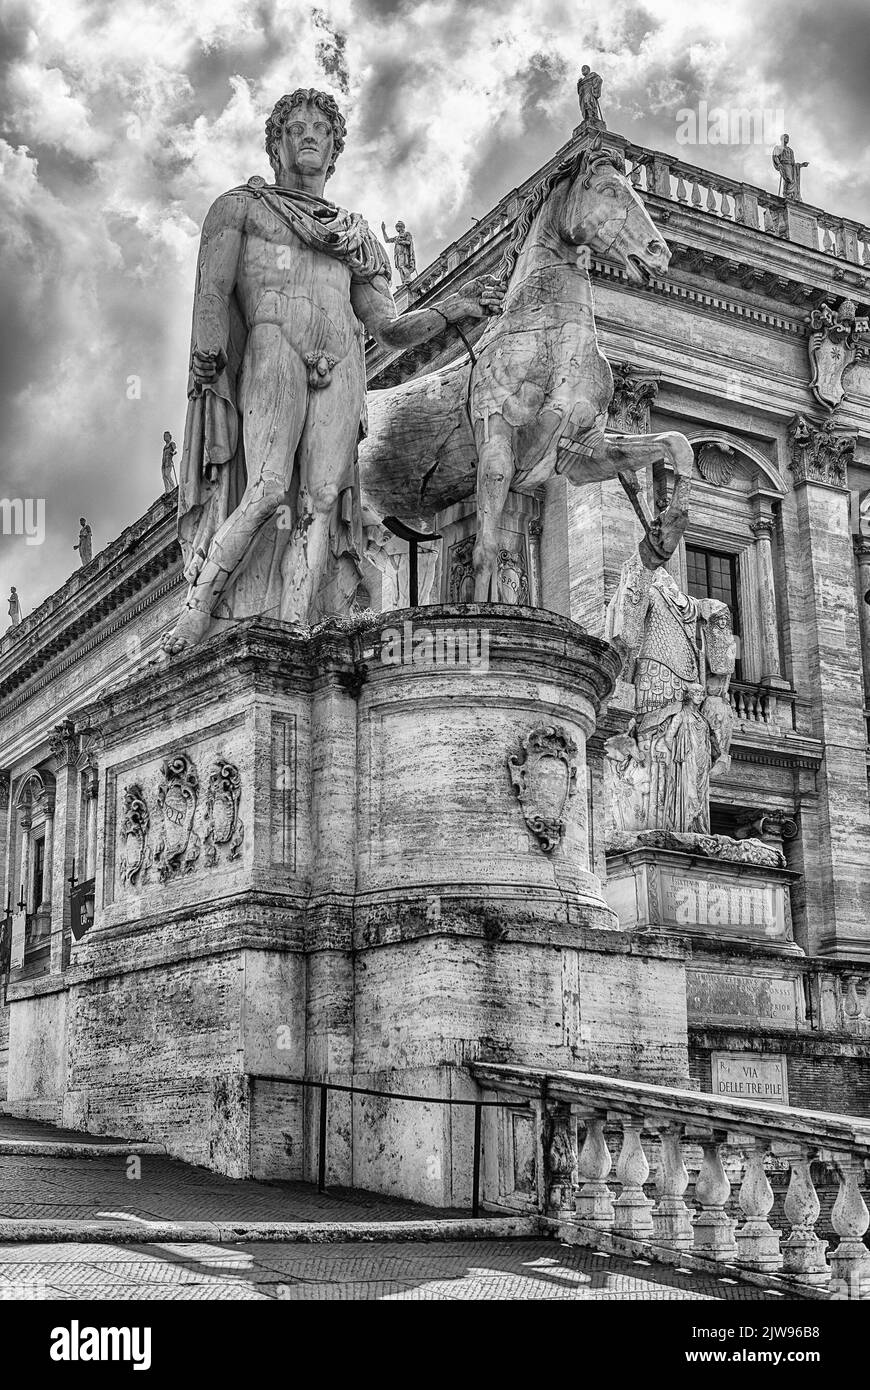 Equestrian statue of Pollux on Capitol in Rome. Italy Stock Photo